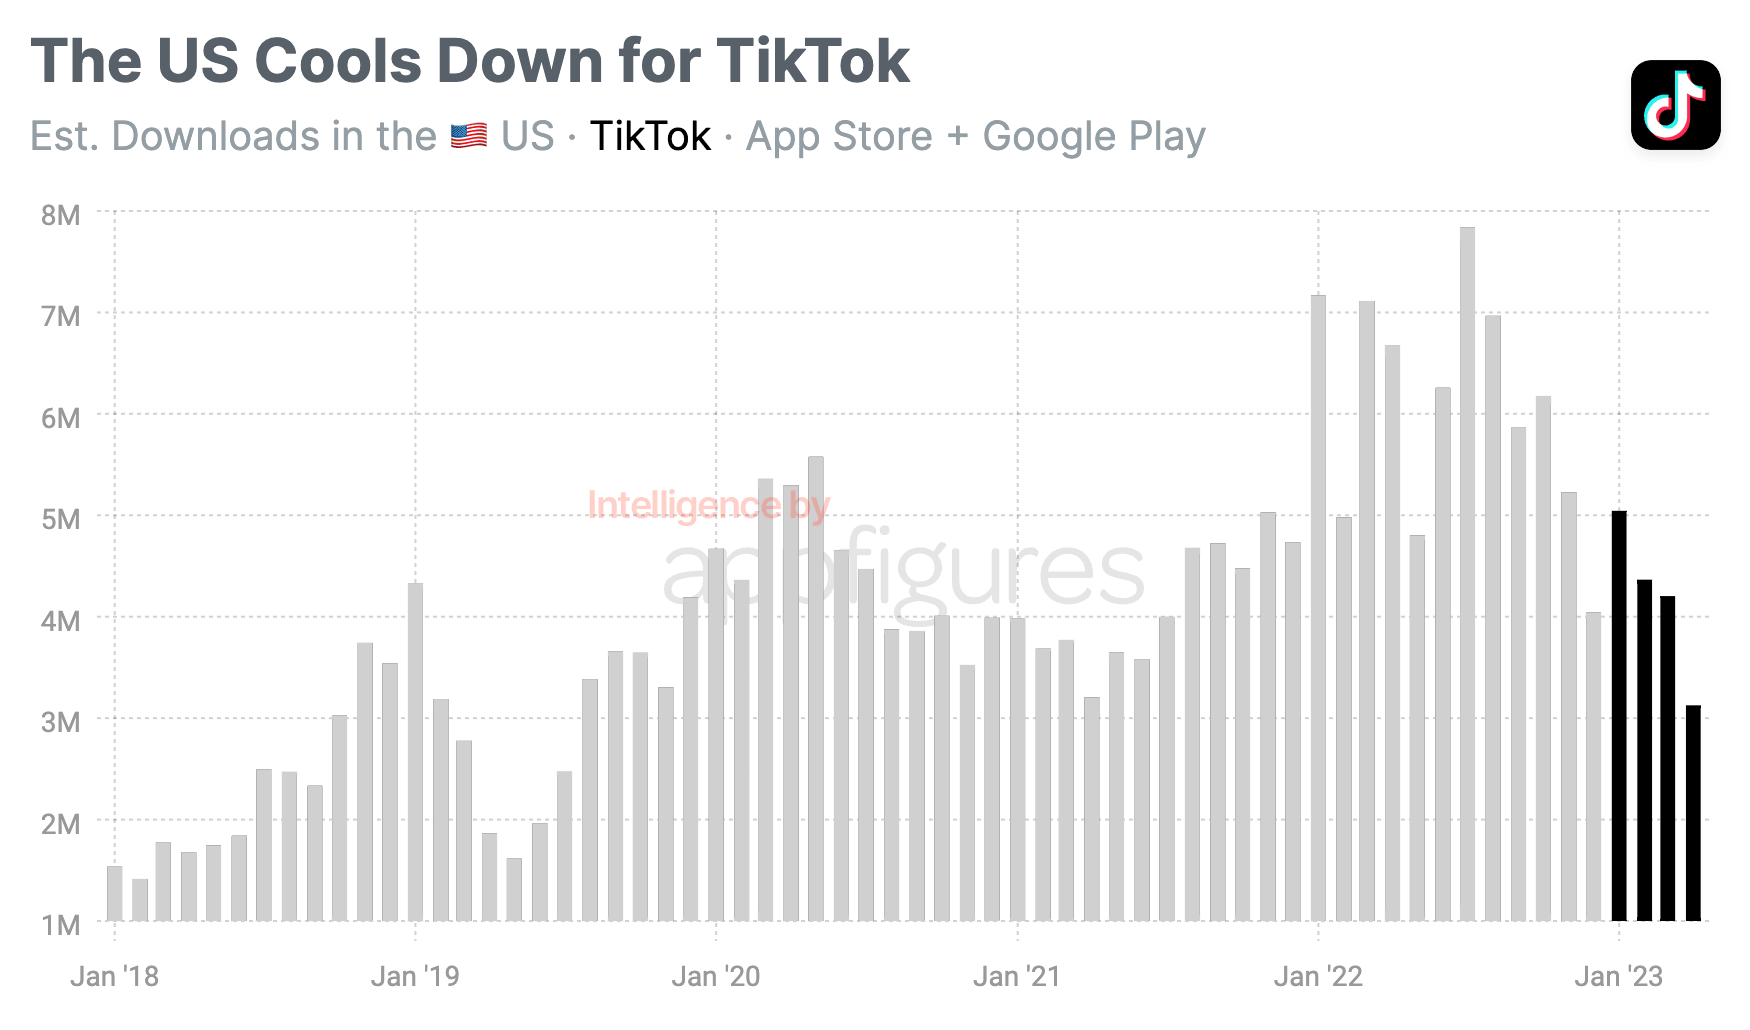 TikTok's US Downloads Take a Hit: What's Behind the Drop?